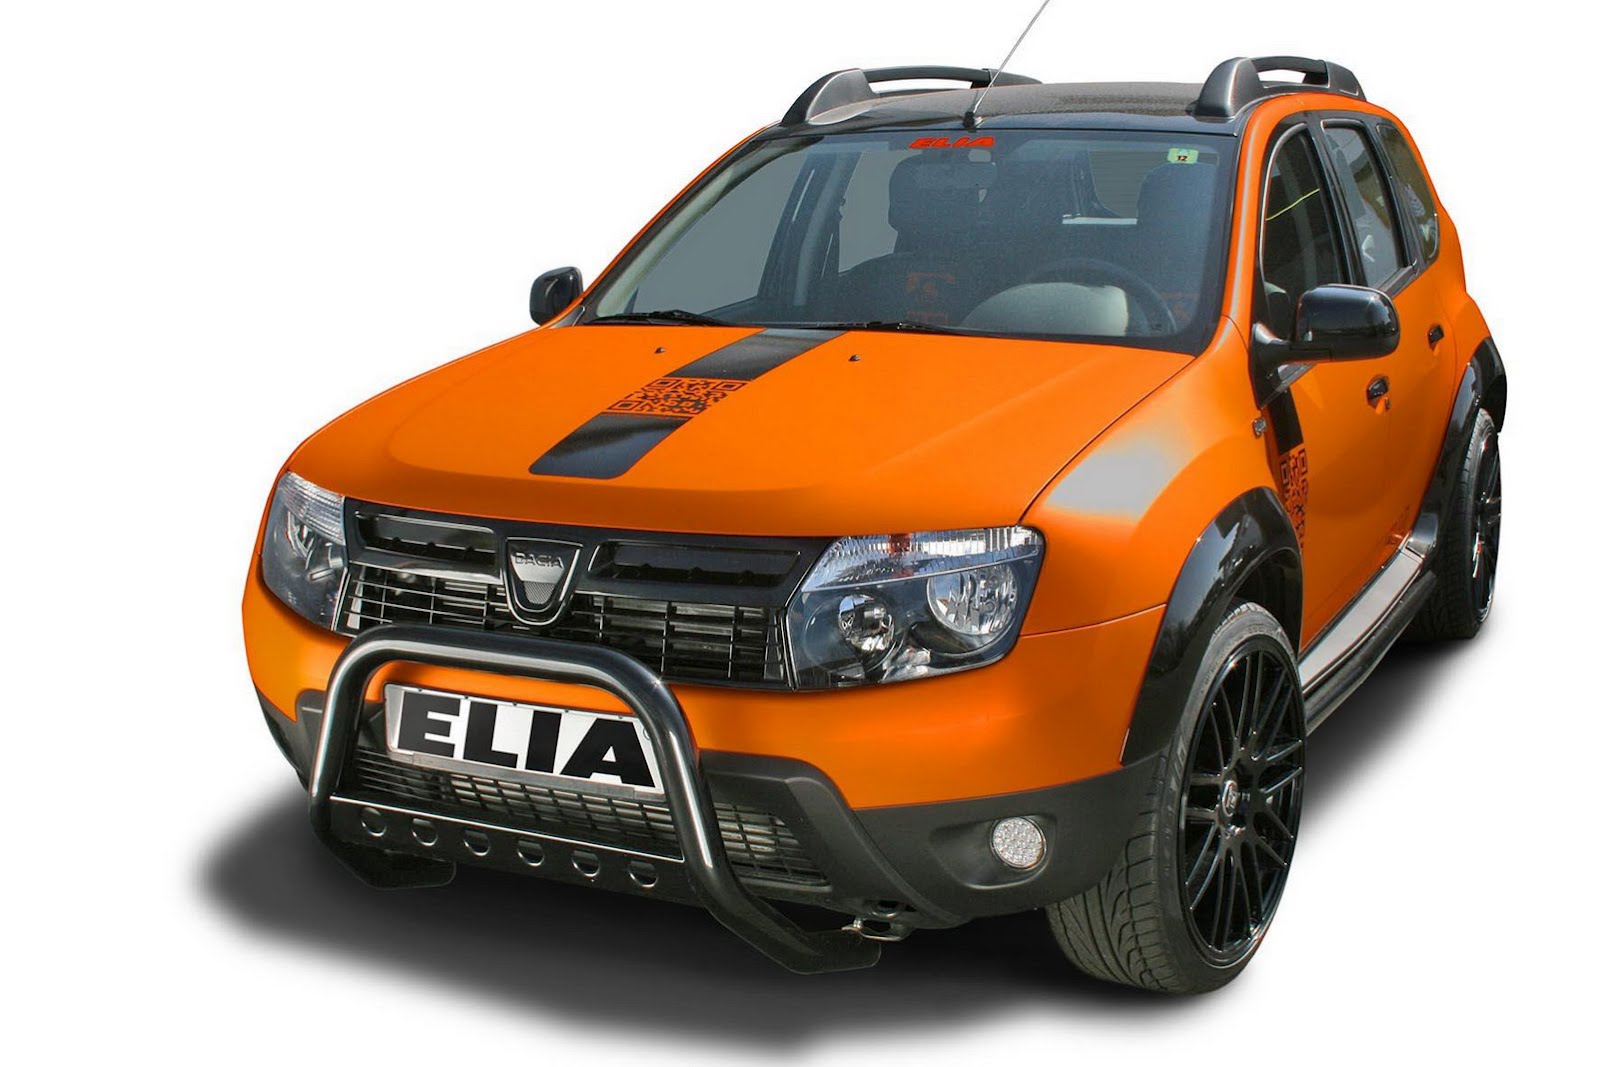 Elia Presents Two Different Tuning Takes on the Dacia Duster